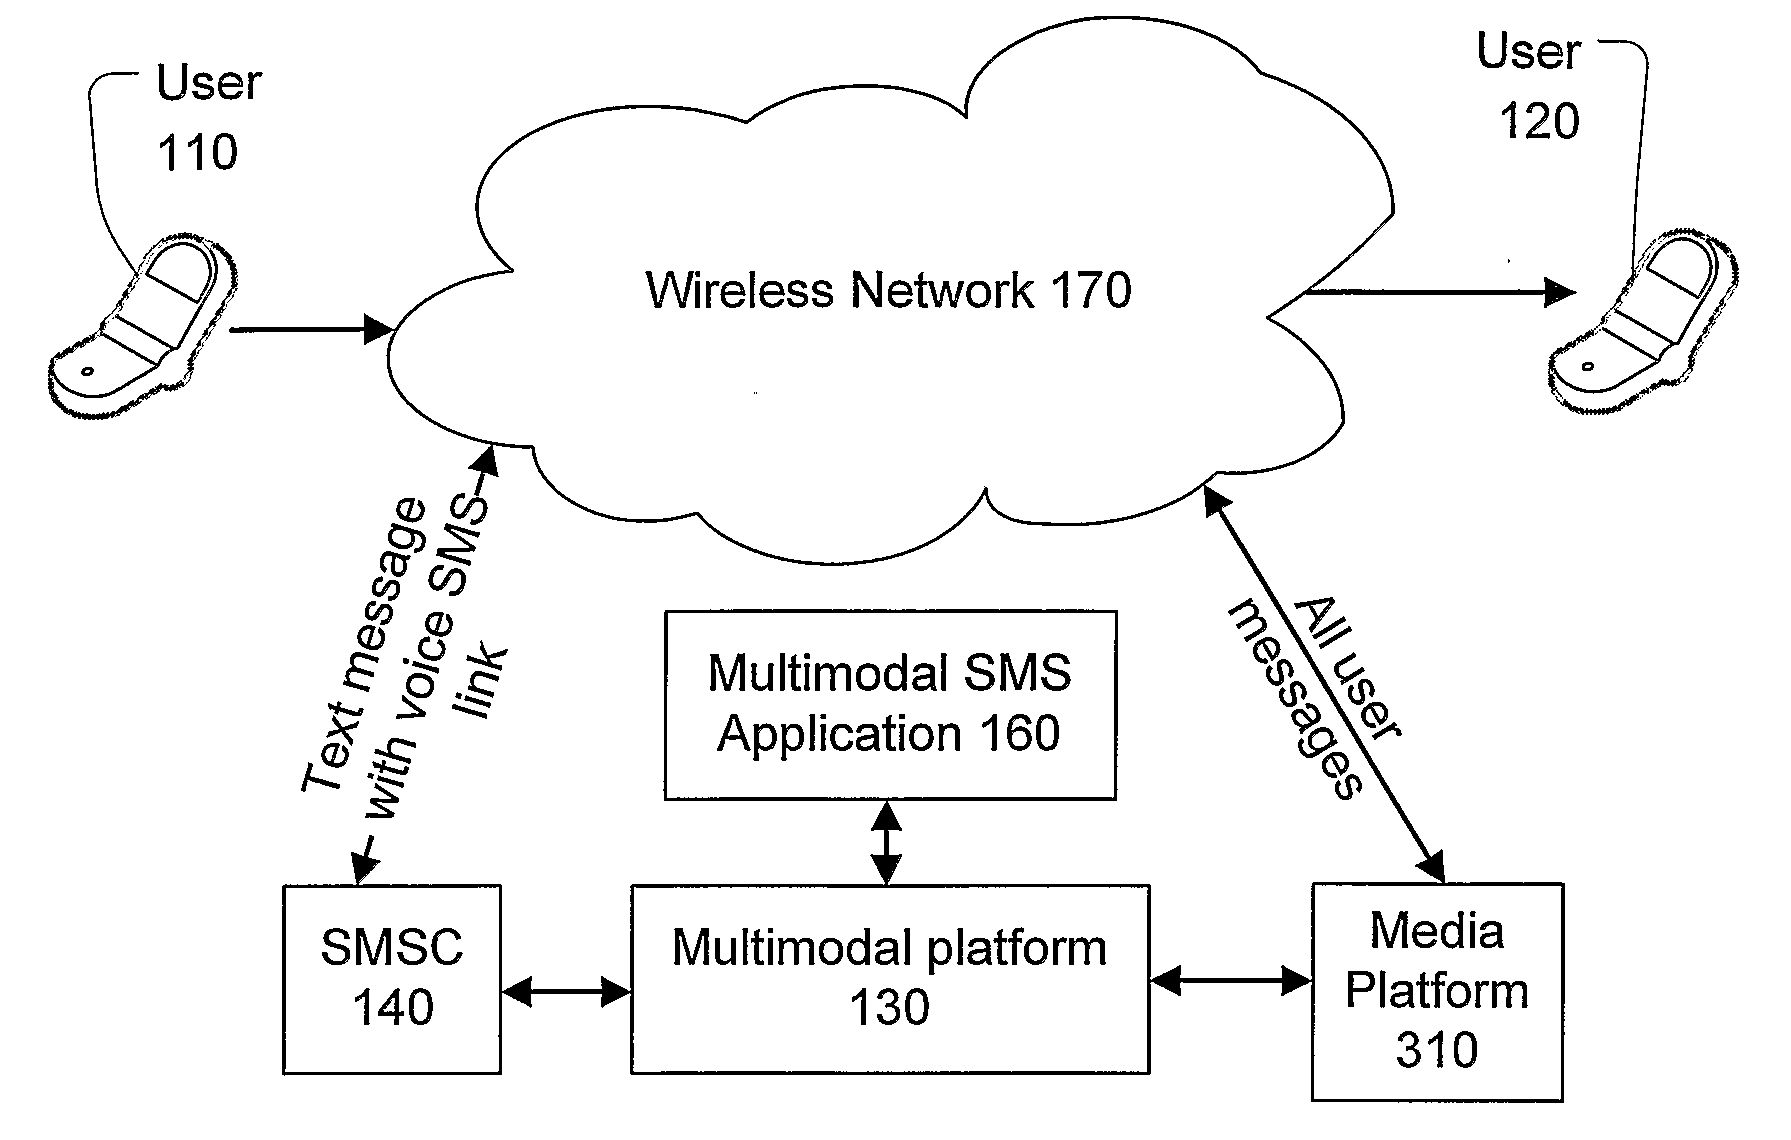 Methods for Identifying Messages and Communicating with Users of a Multimodal Message Service